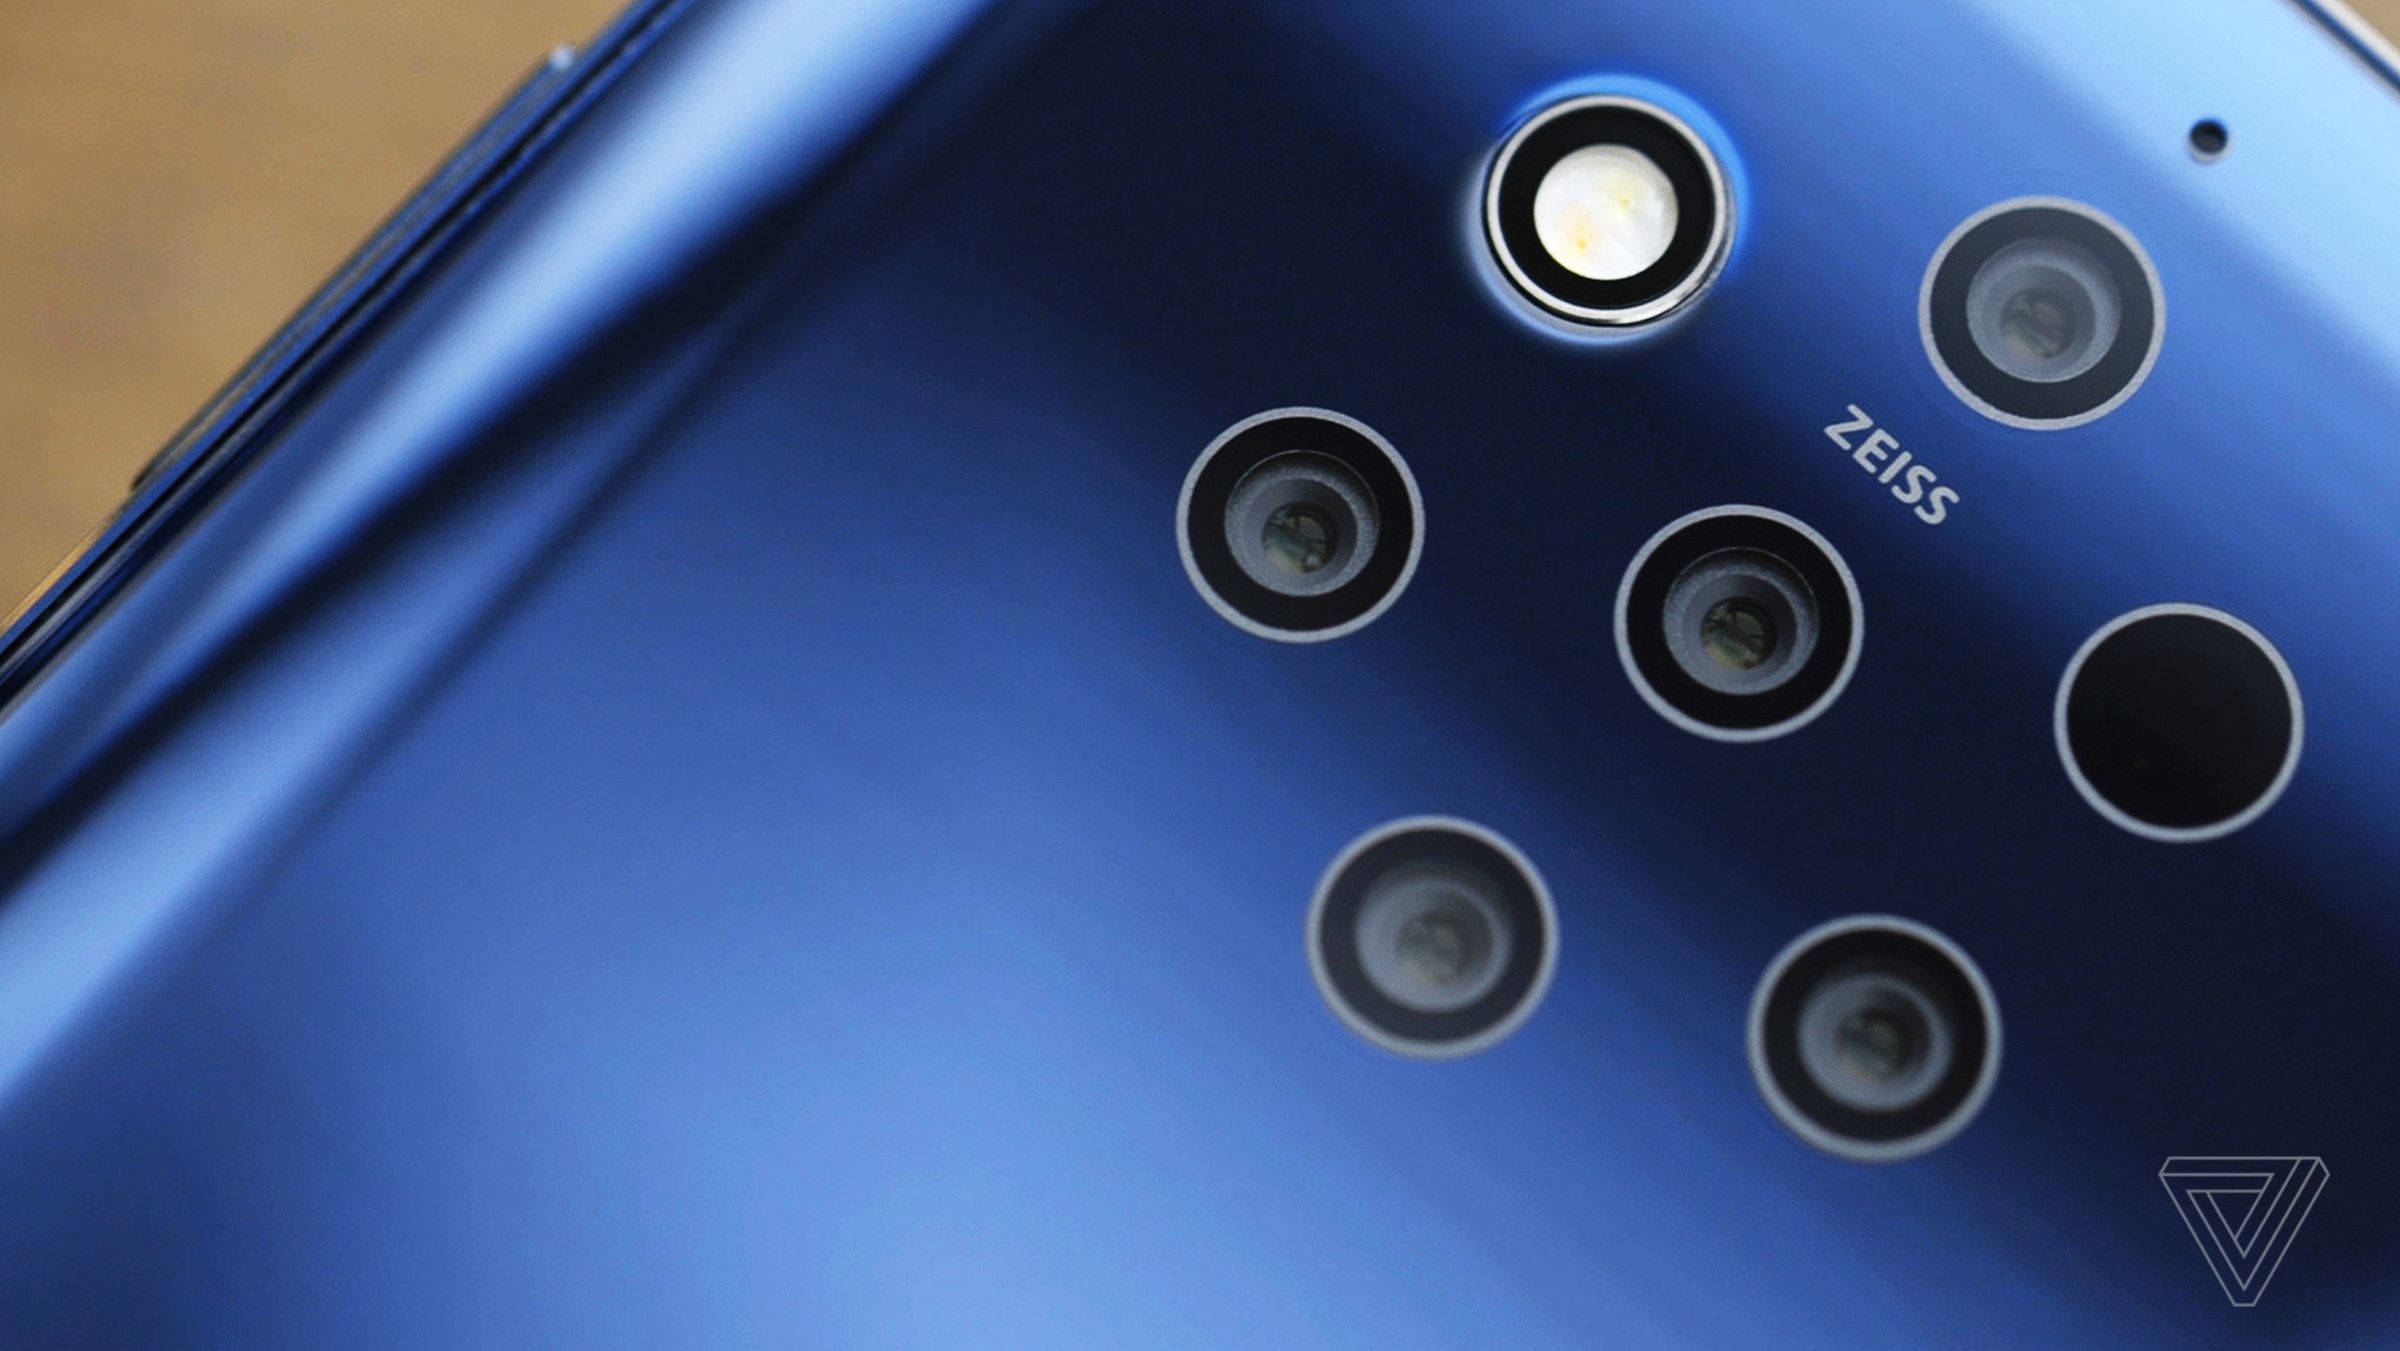 HMD blames the 9 PureView’s unique camera array for being unable to update it to Android 11